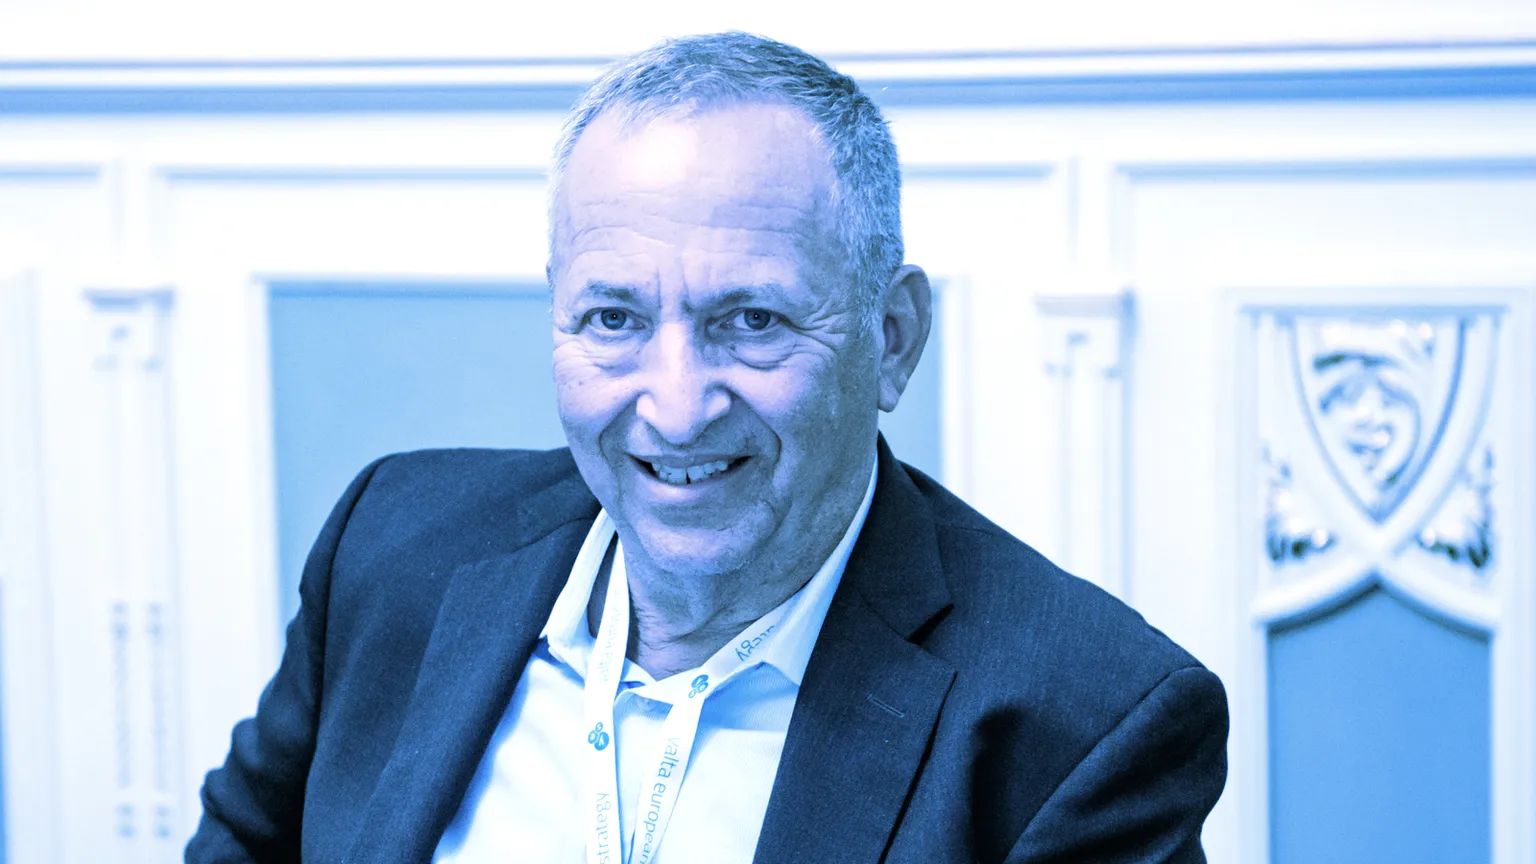 Lawrence Summers. Image: Shutterstock